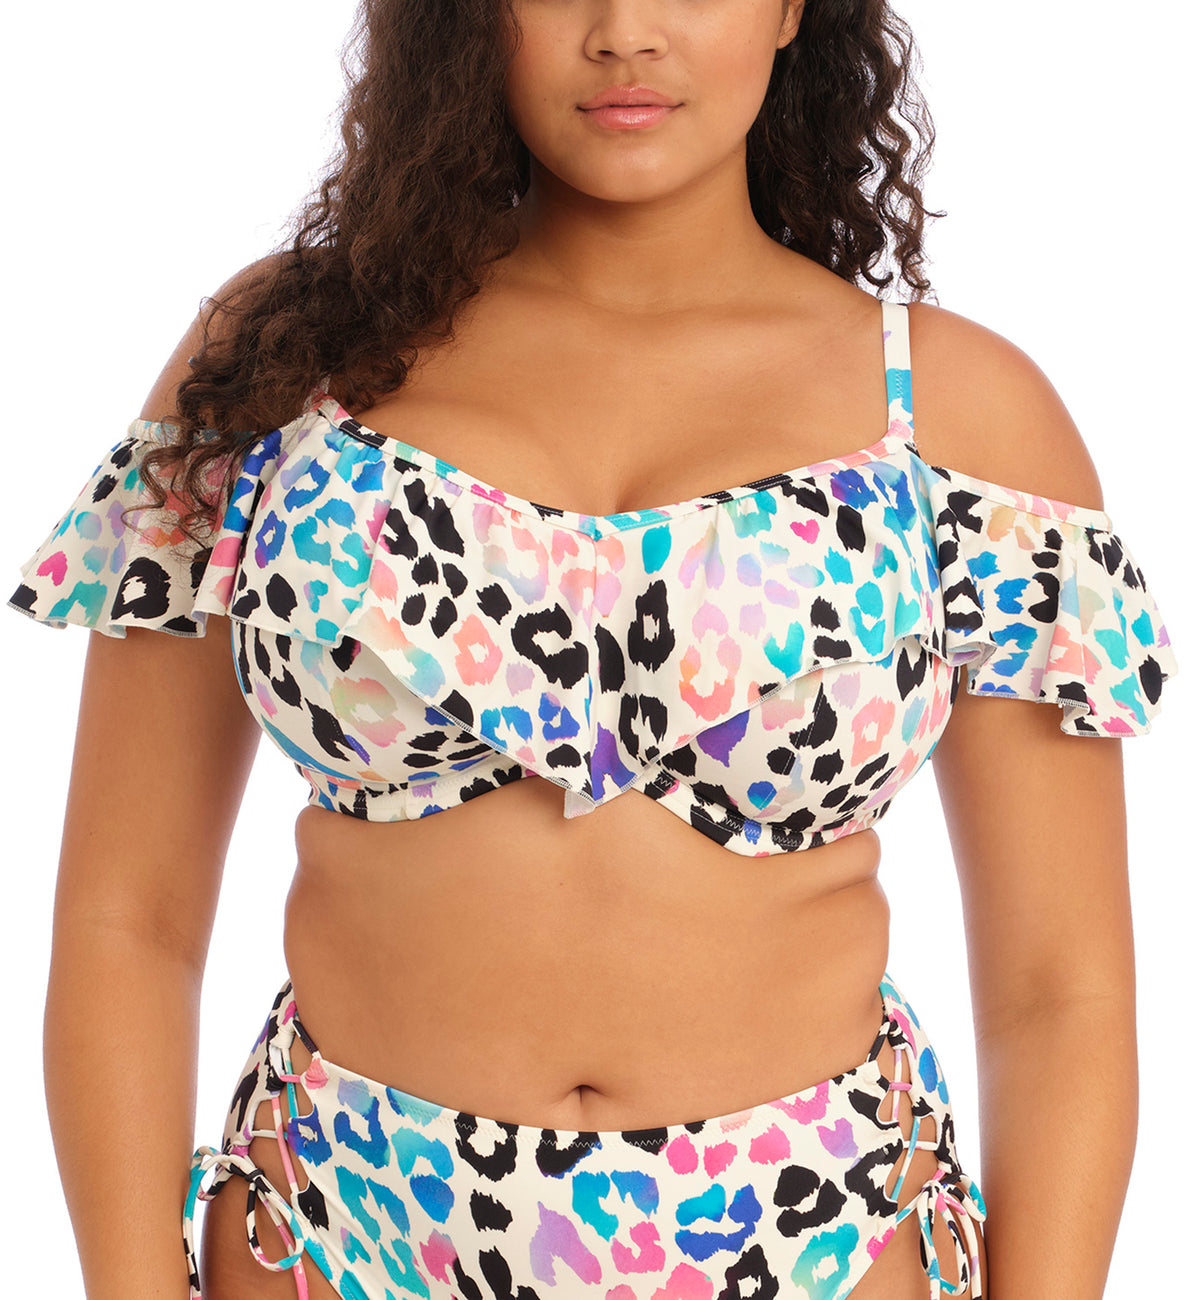 34g Swimwear, Shop The Largest Collection